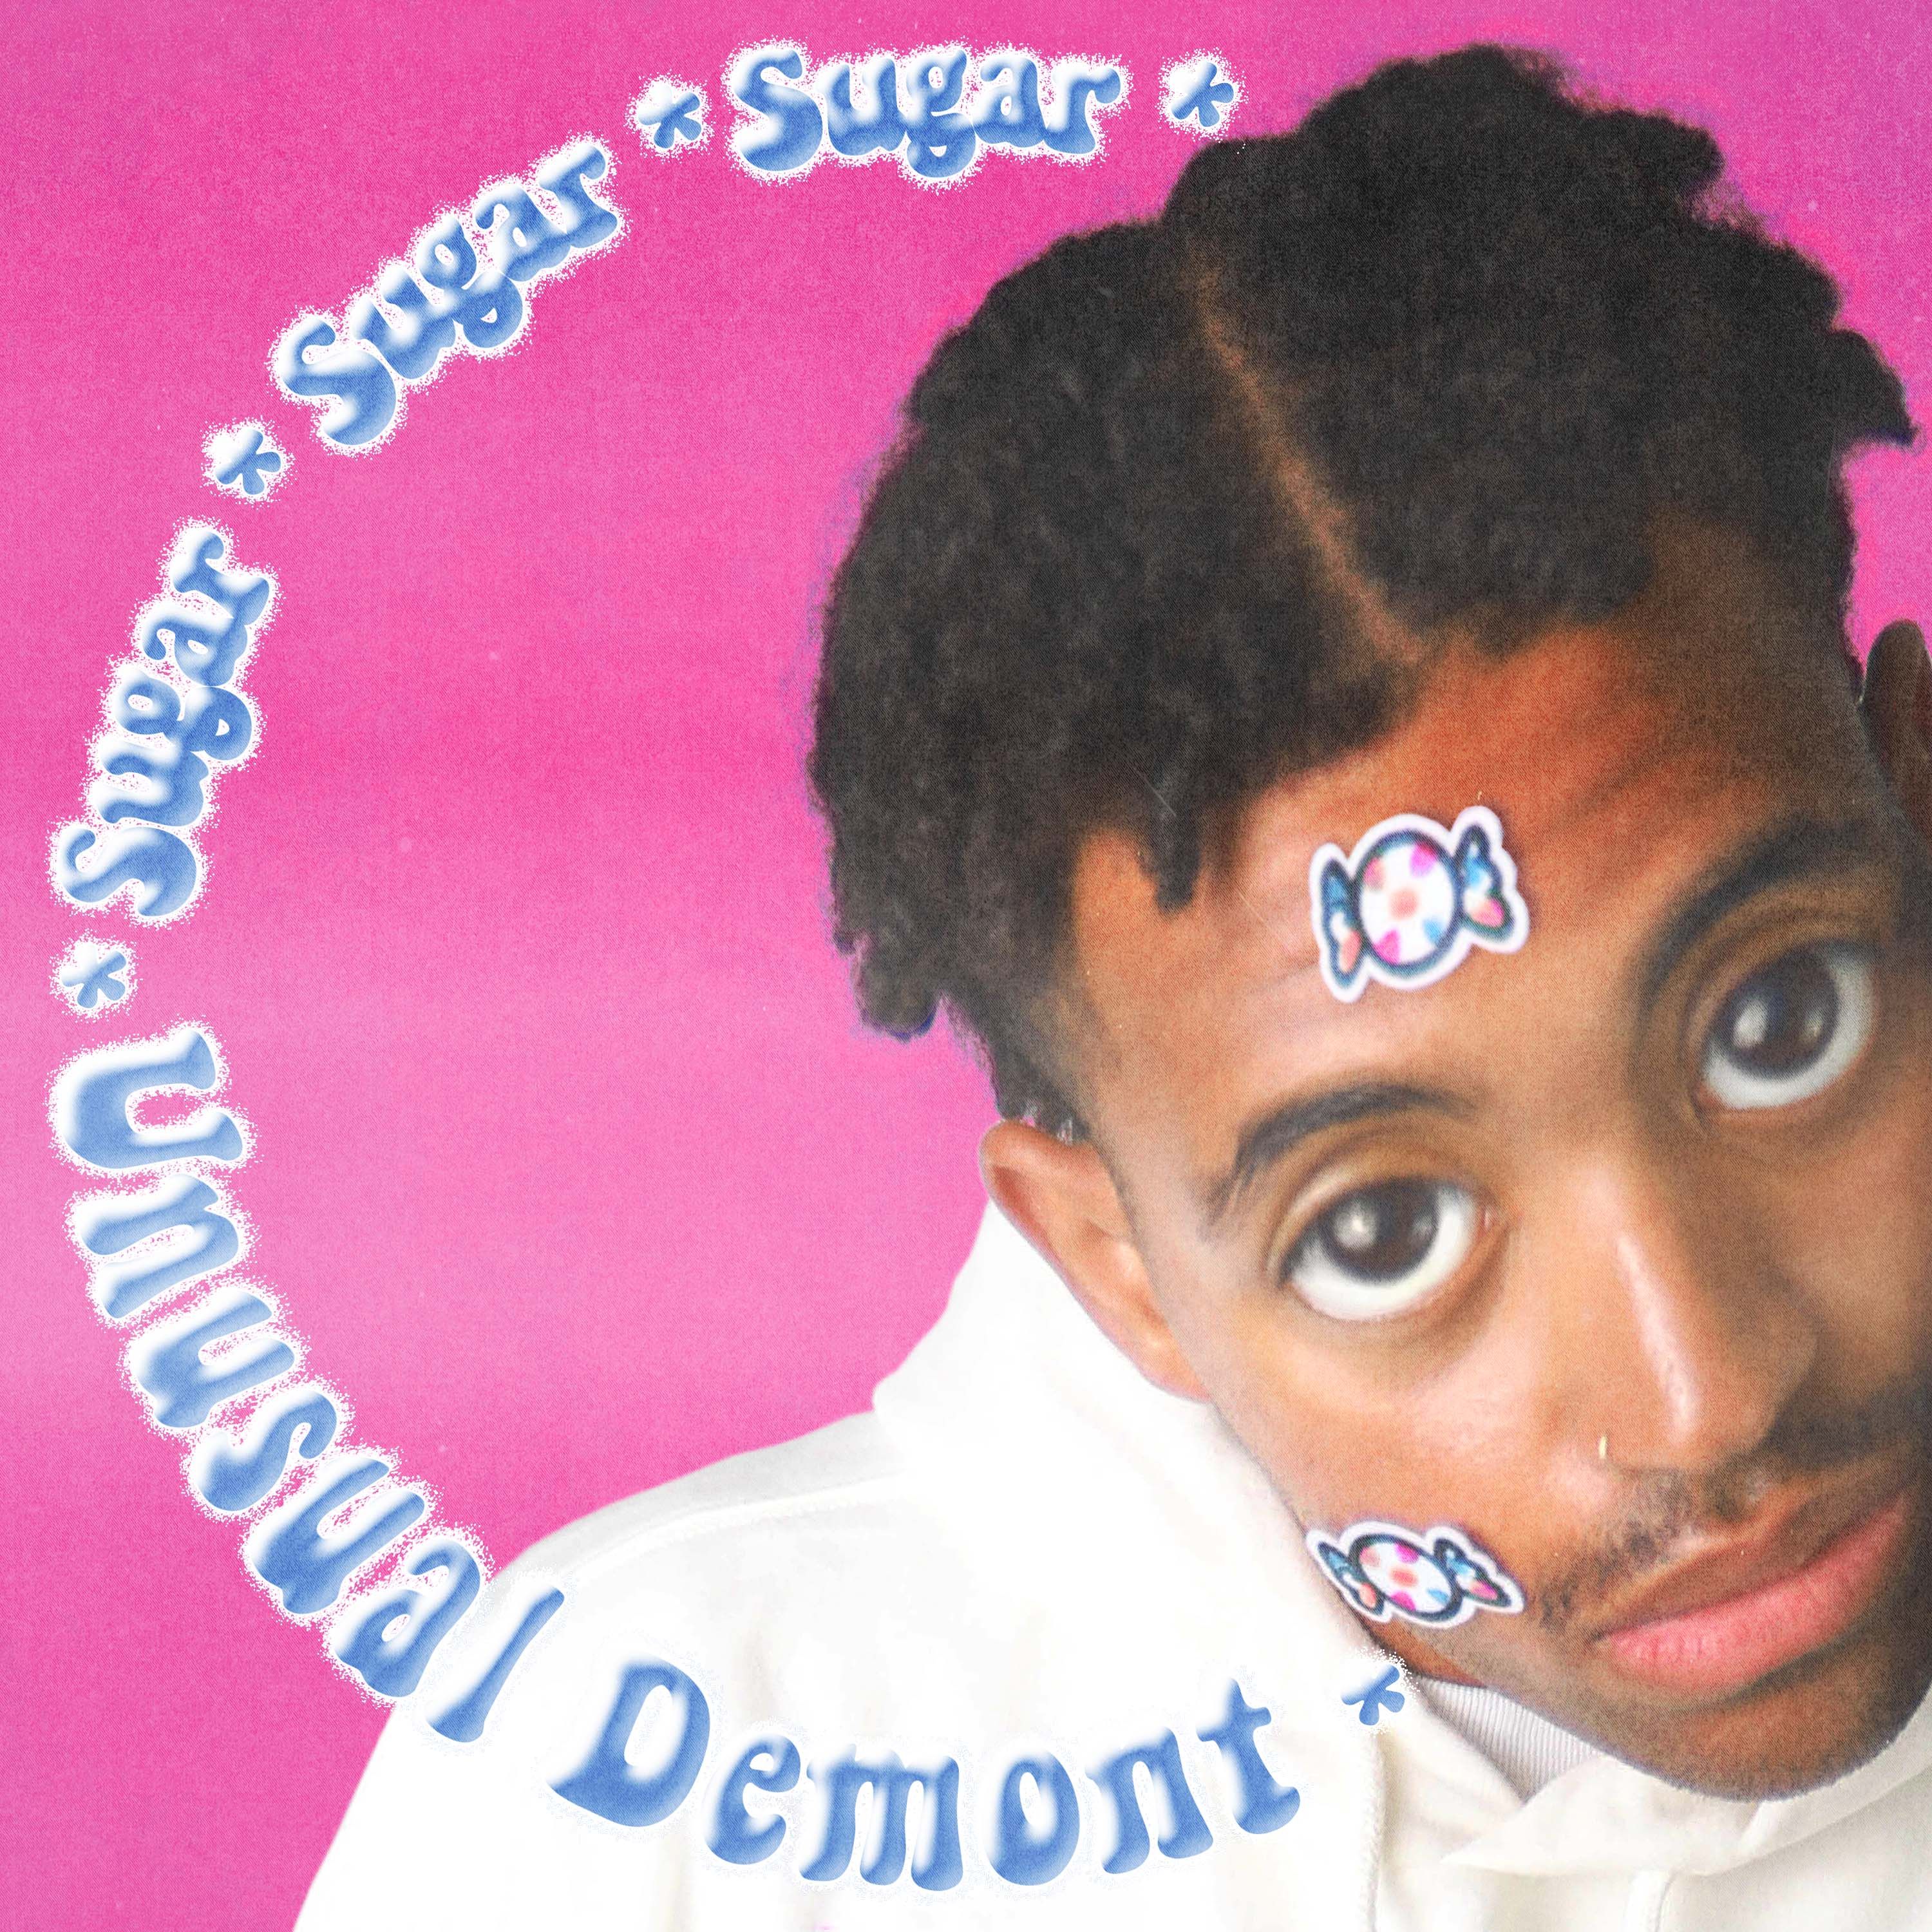 Cover Art for Unusual Demont's single, Sugar